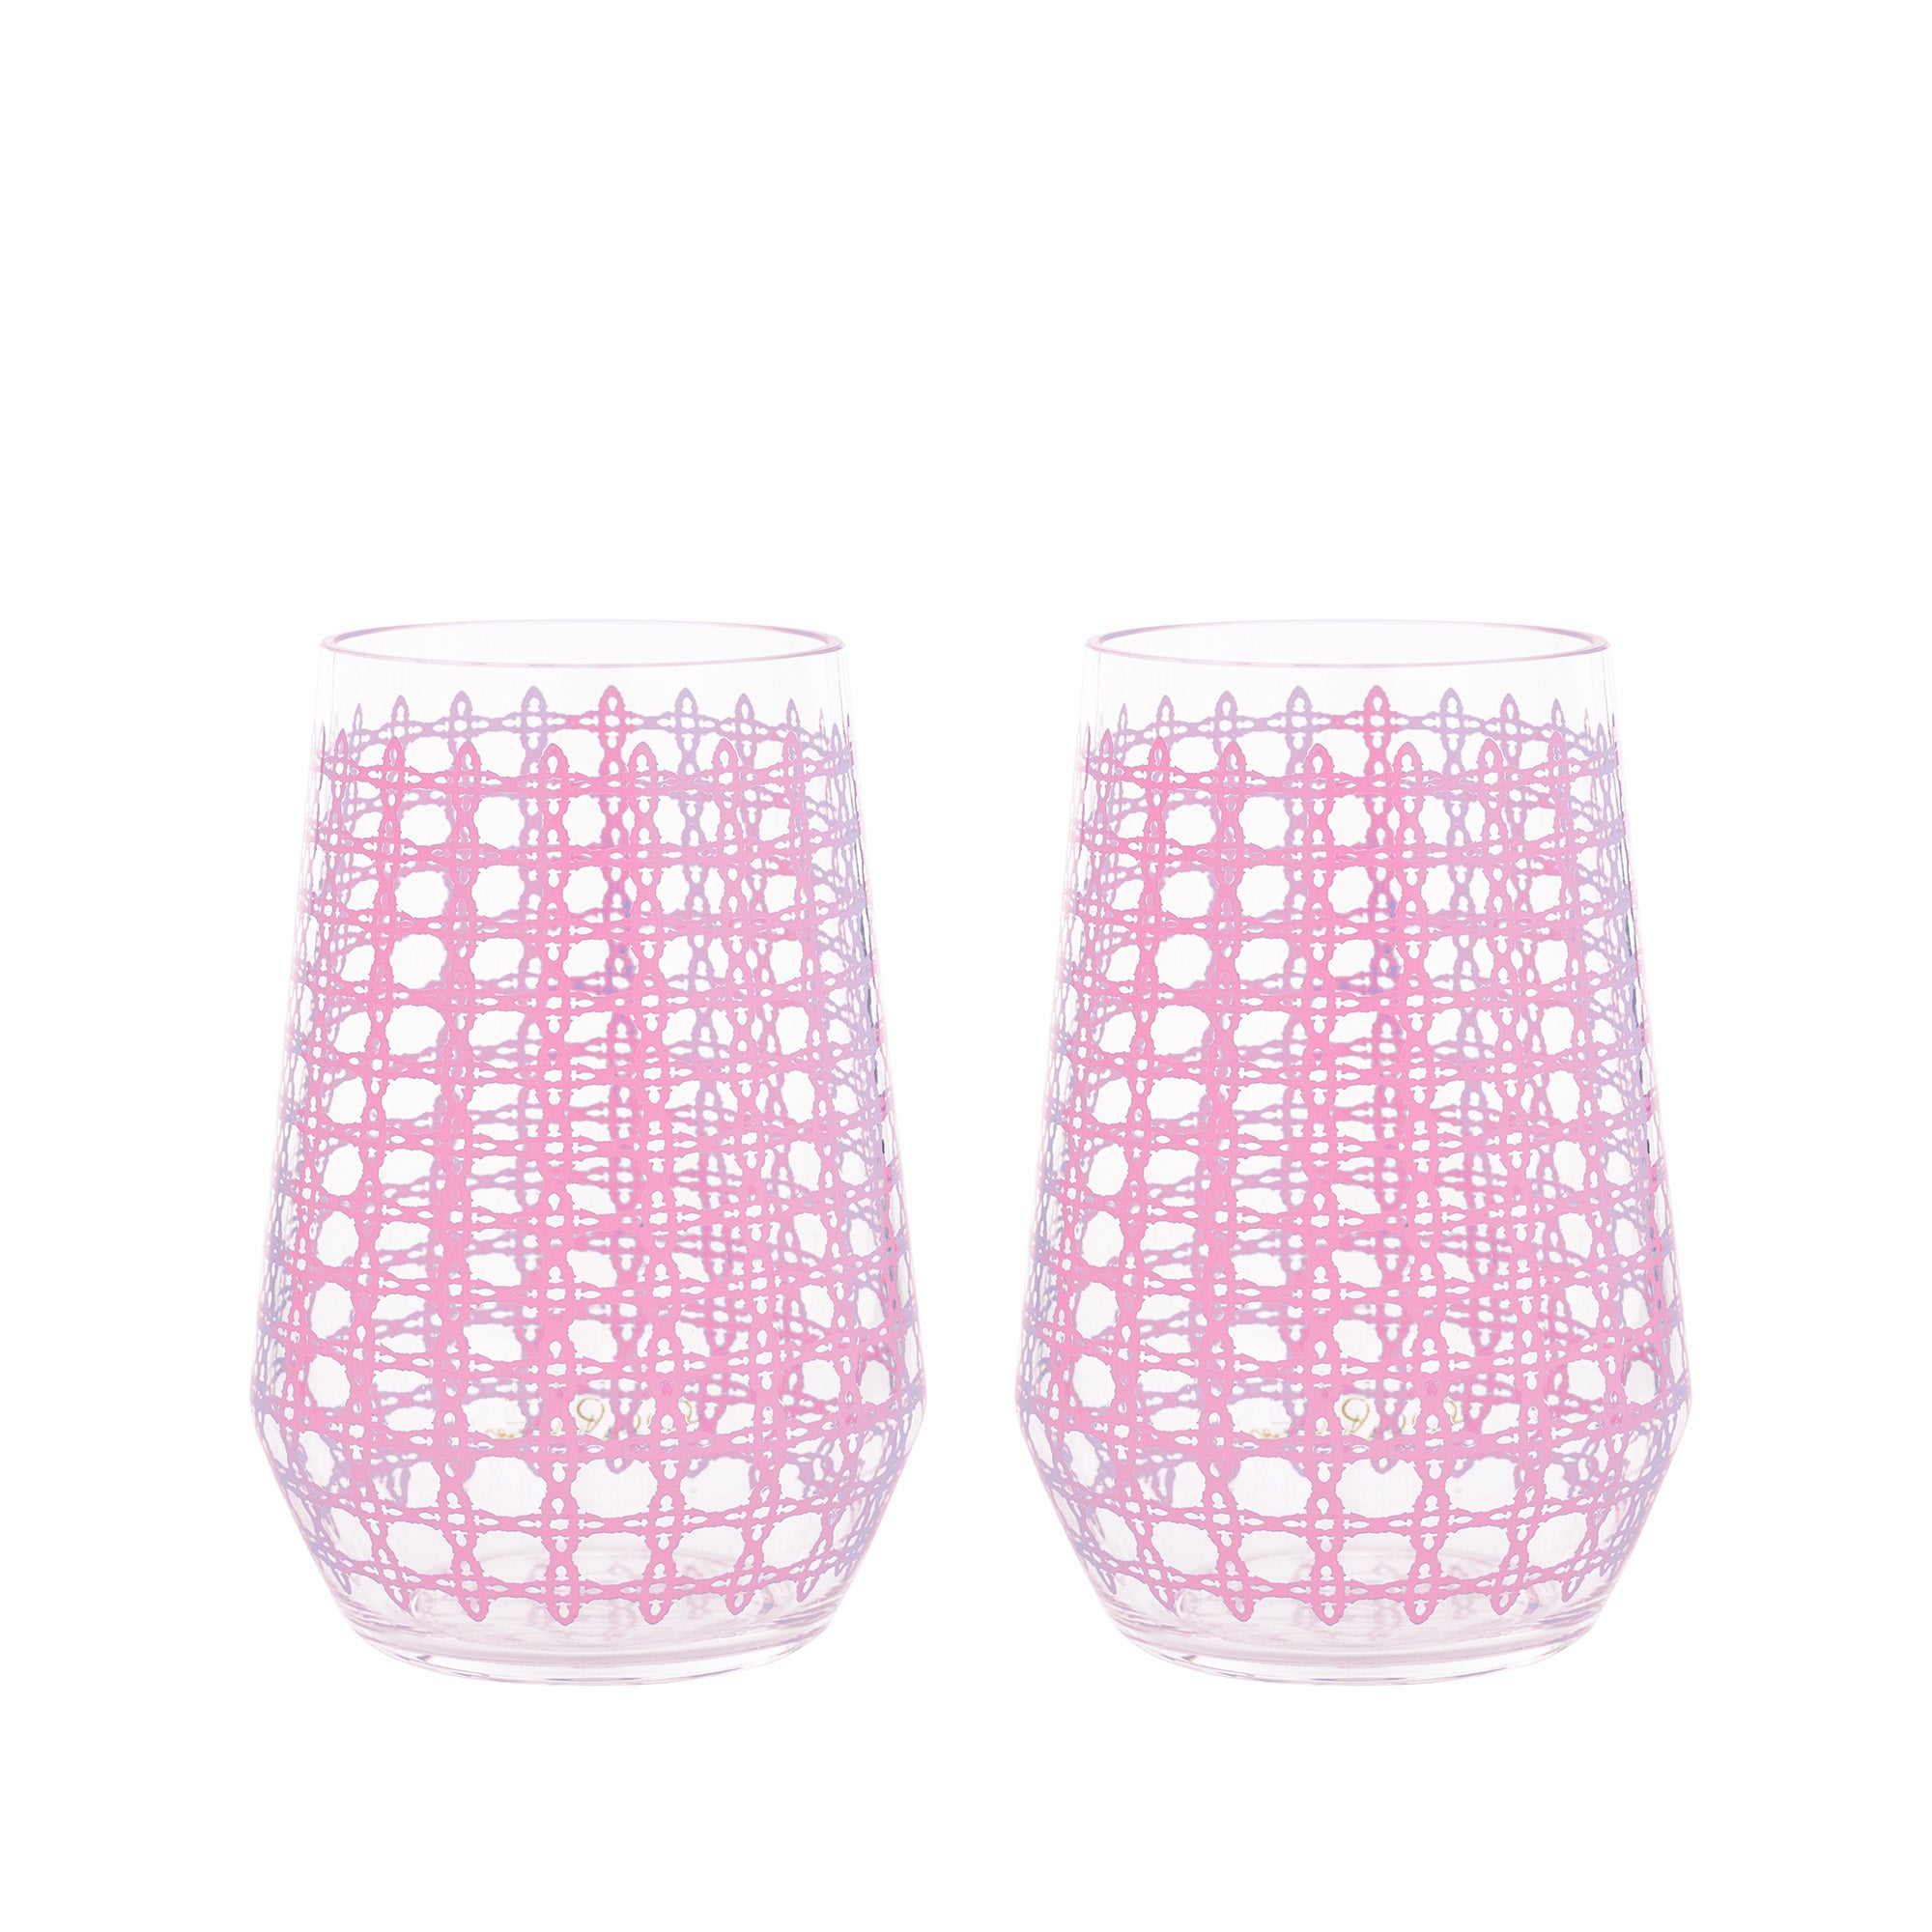 Acrylic Wine Glass Set in Conch Shell Pink Caning - The Preppy Bunny